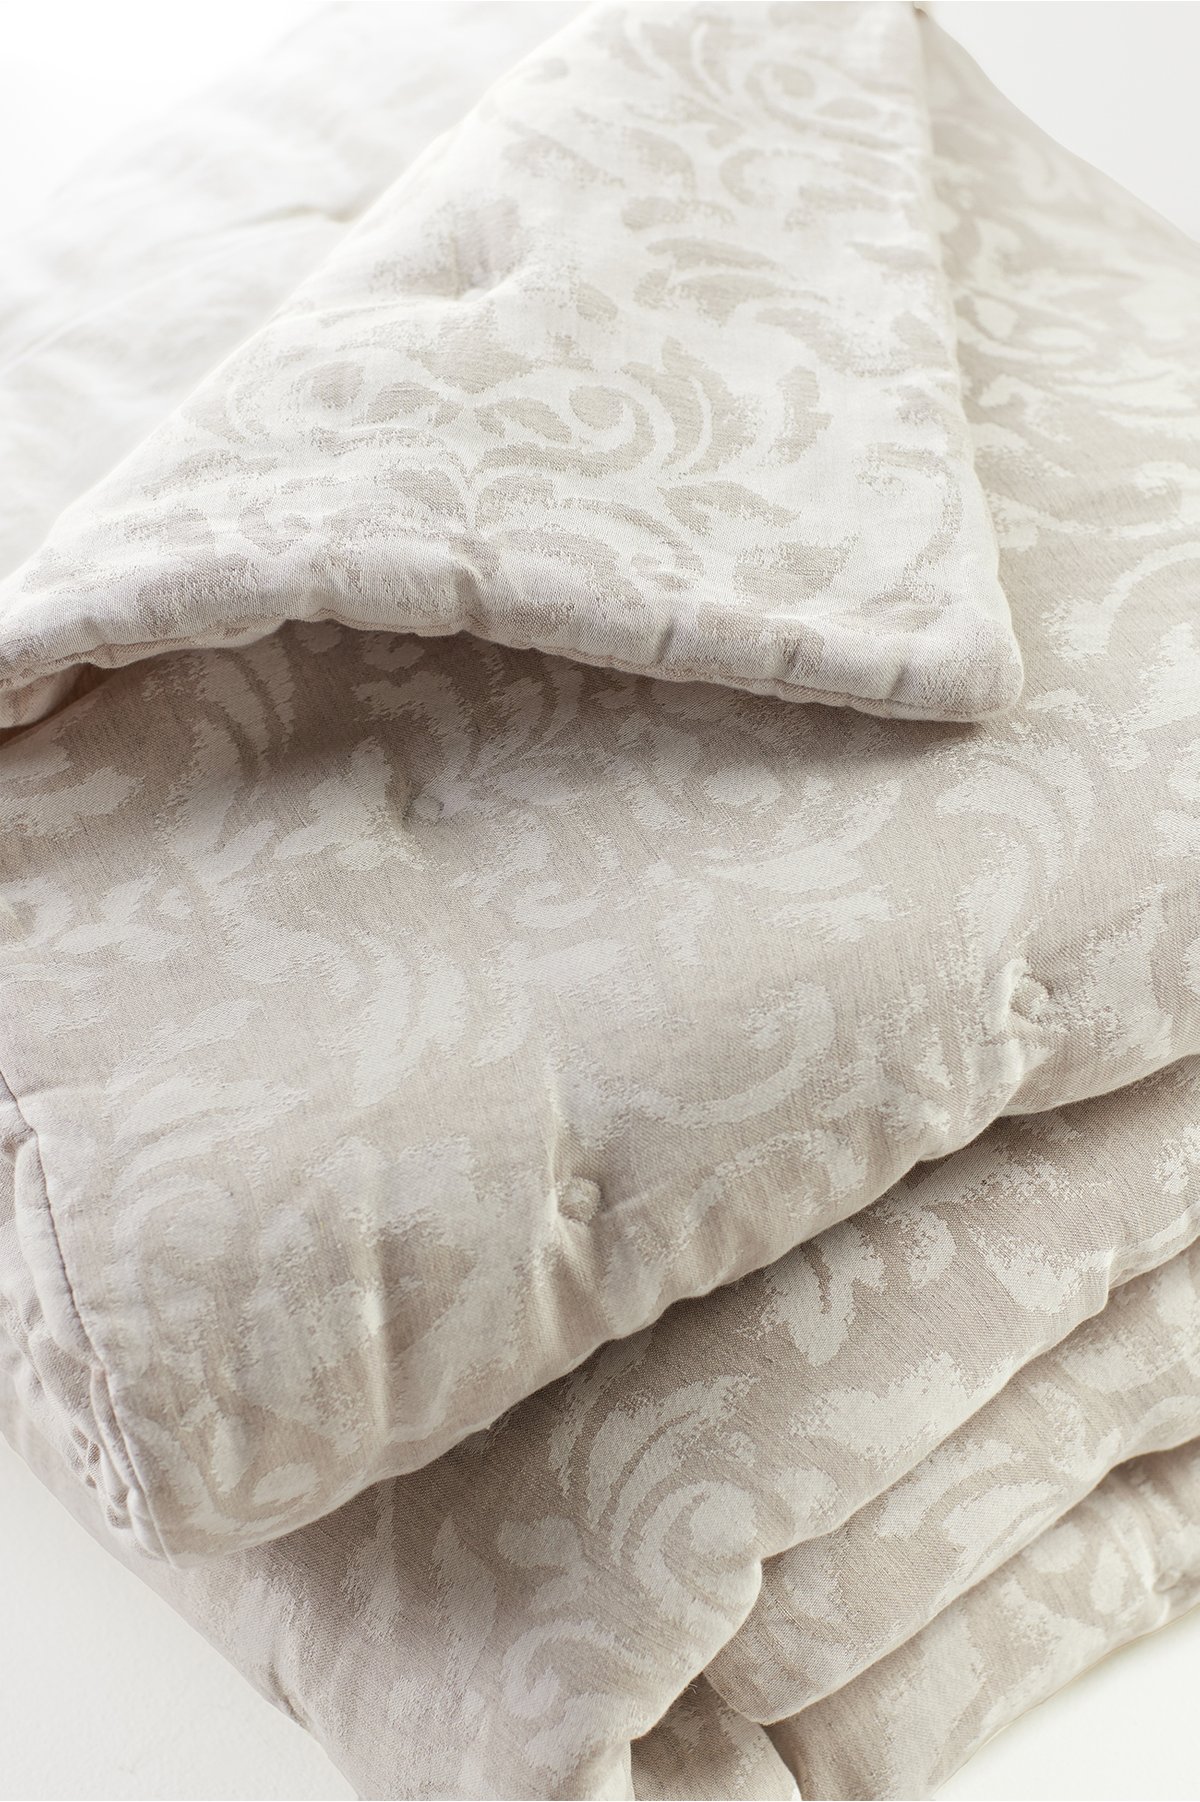 Rosalyn Damask Comforter by Soft Surroundings, in Rose Sand size Queen